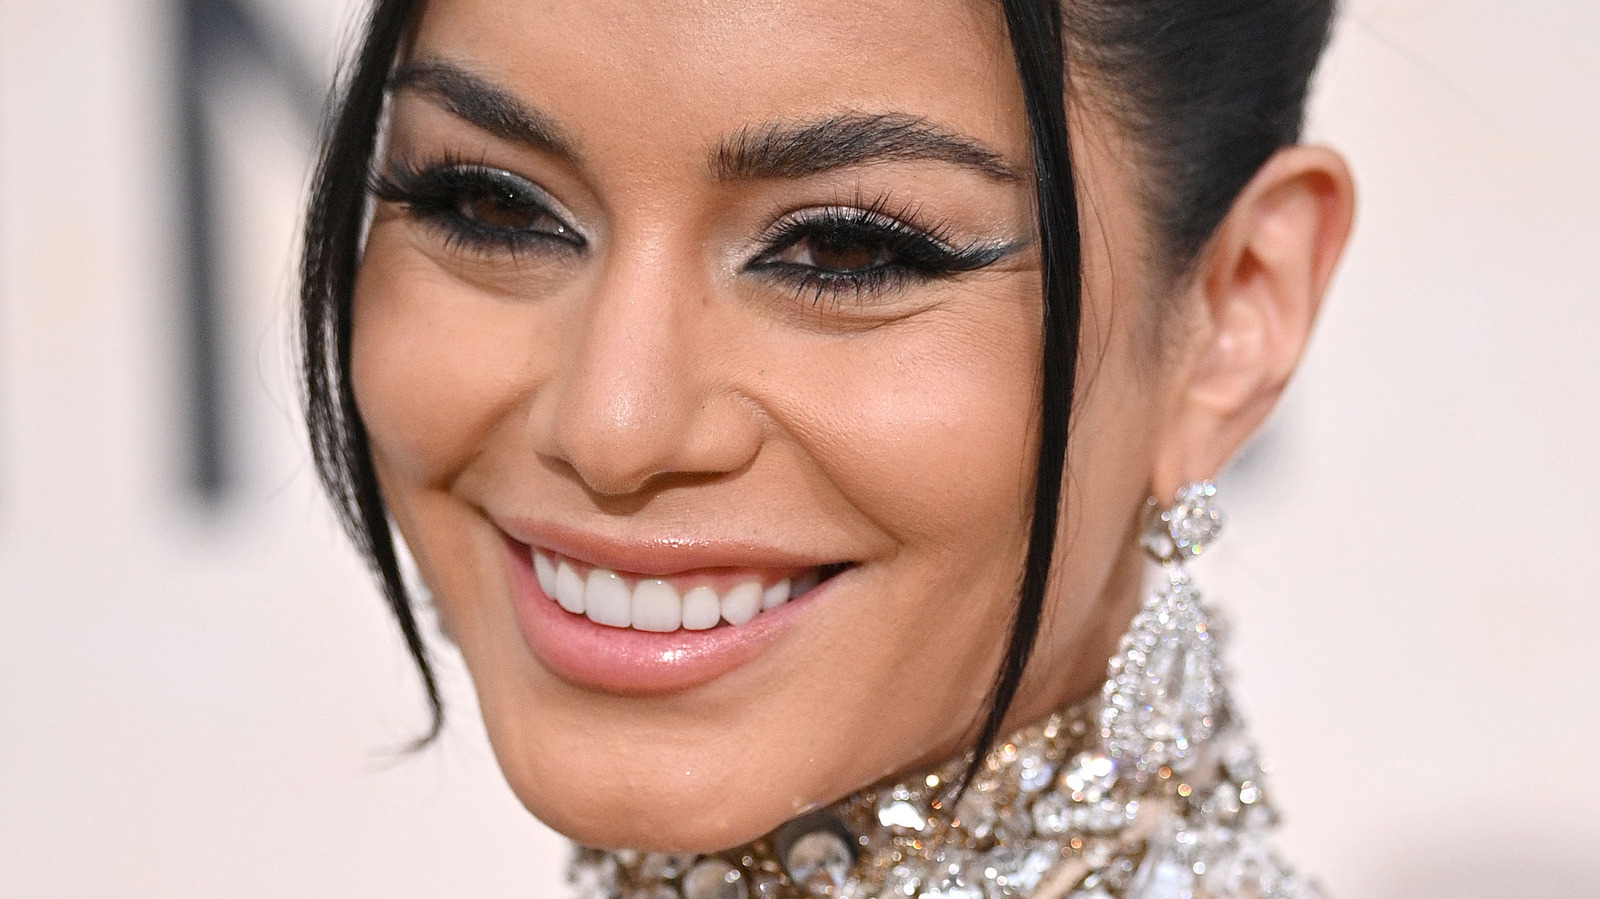 What You Don’t Know About Vanessa Hudgens